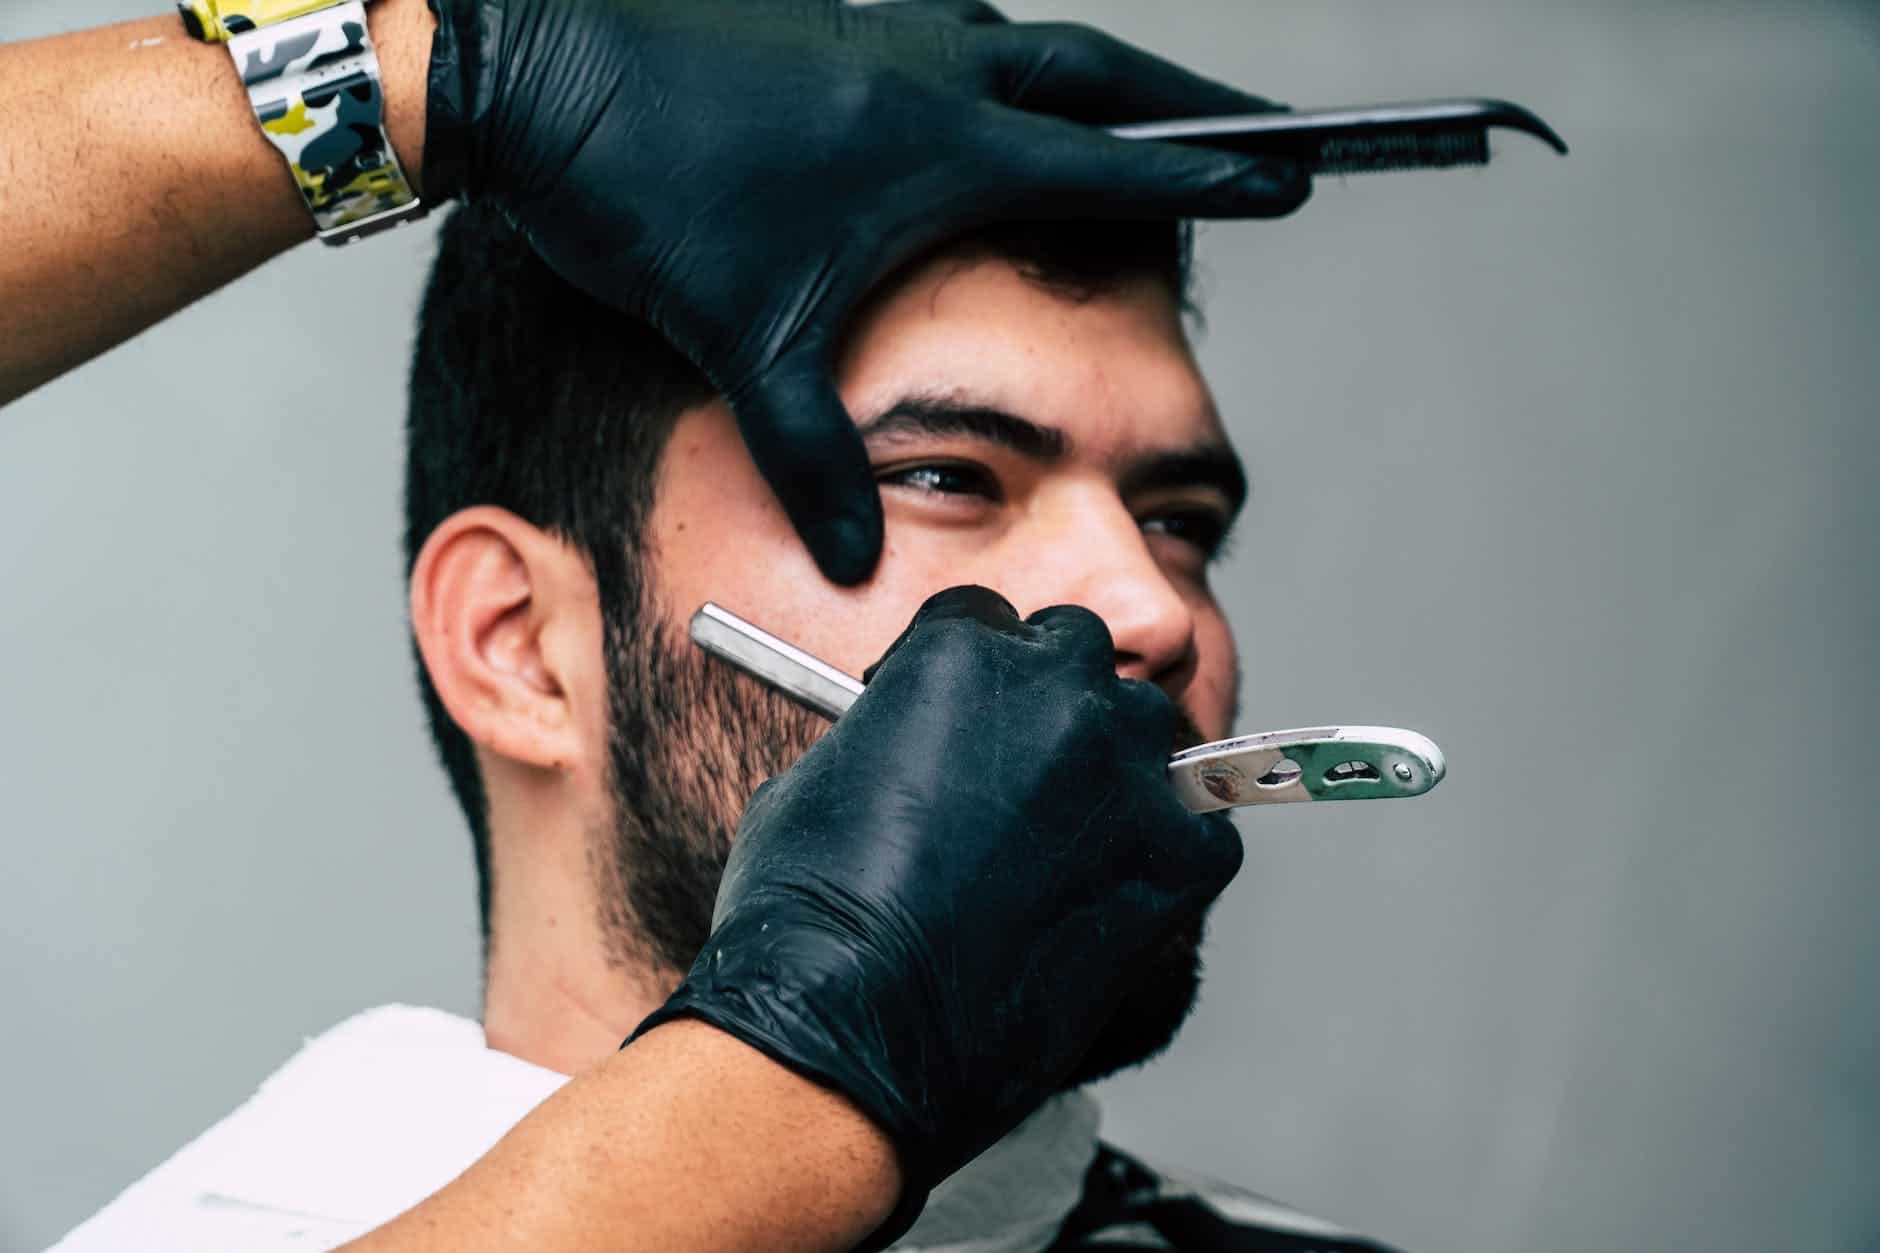 person shaving a man s face with straight razor